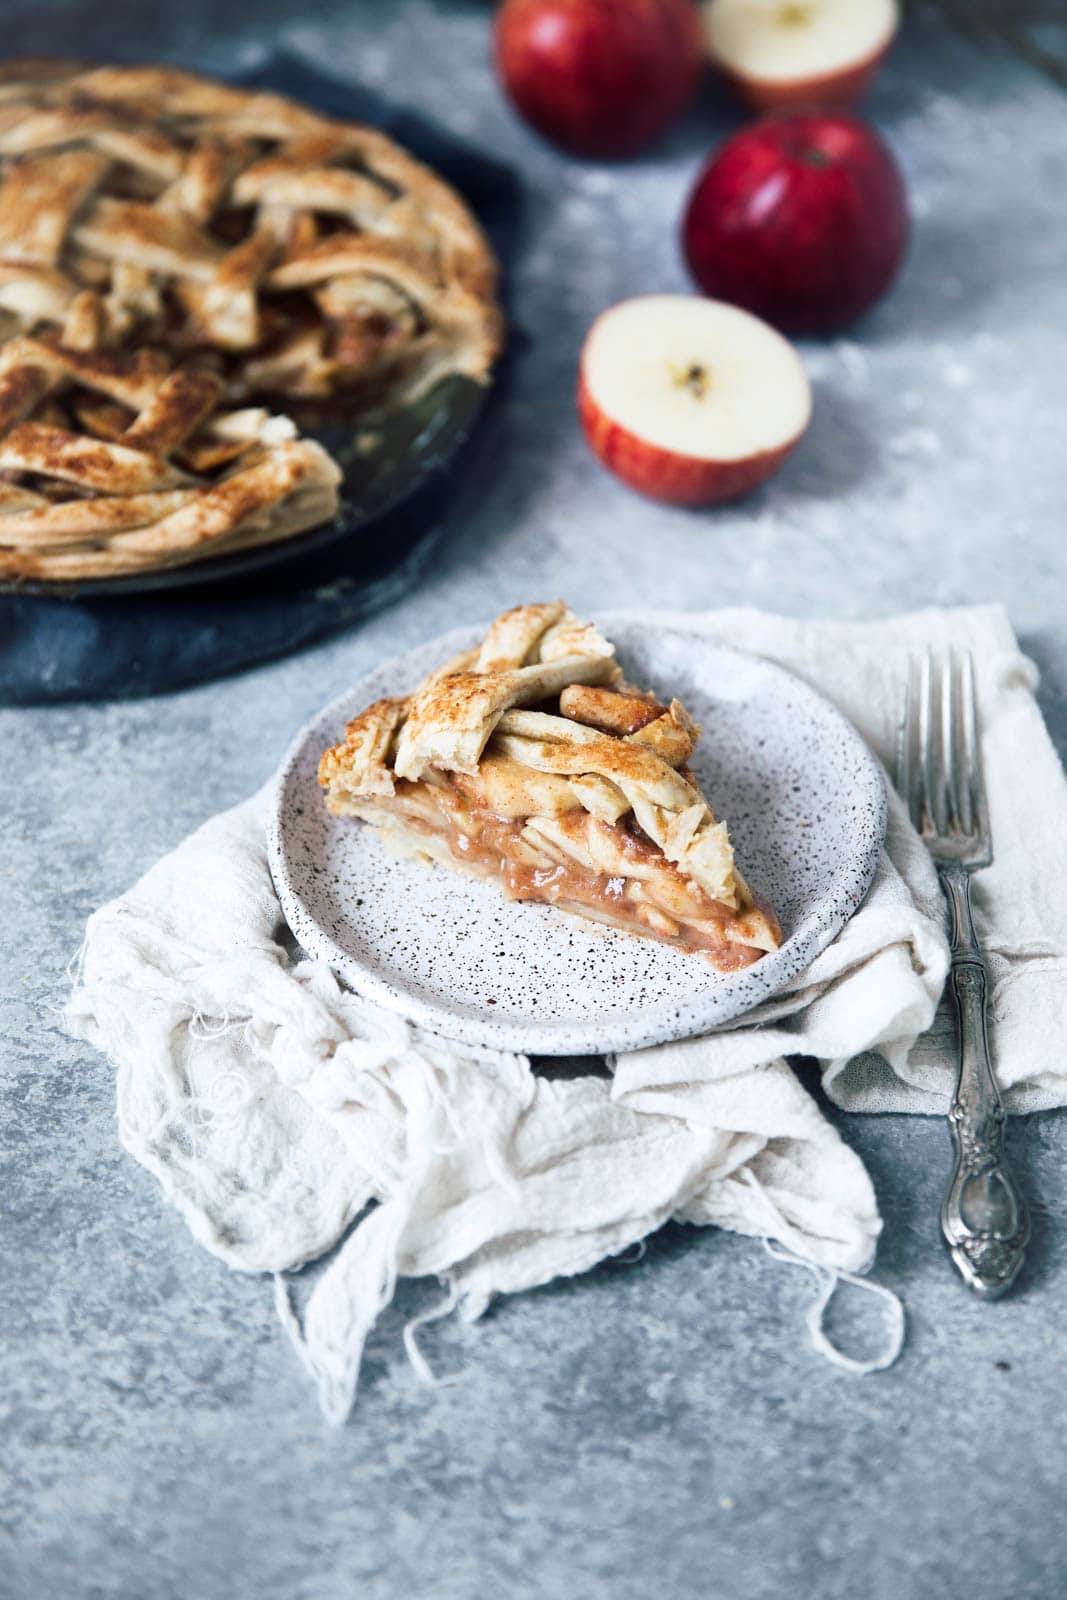 There's nothing better than homemade Apple Pie. Except maybe Salted Maple Caramel Apple Pie.